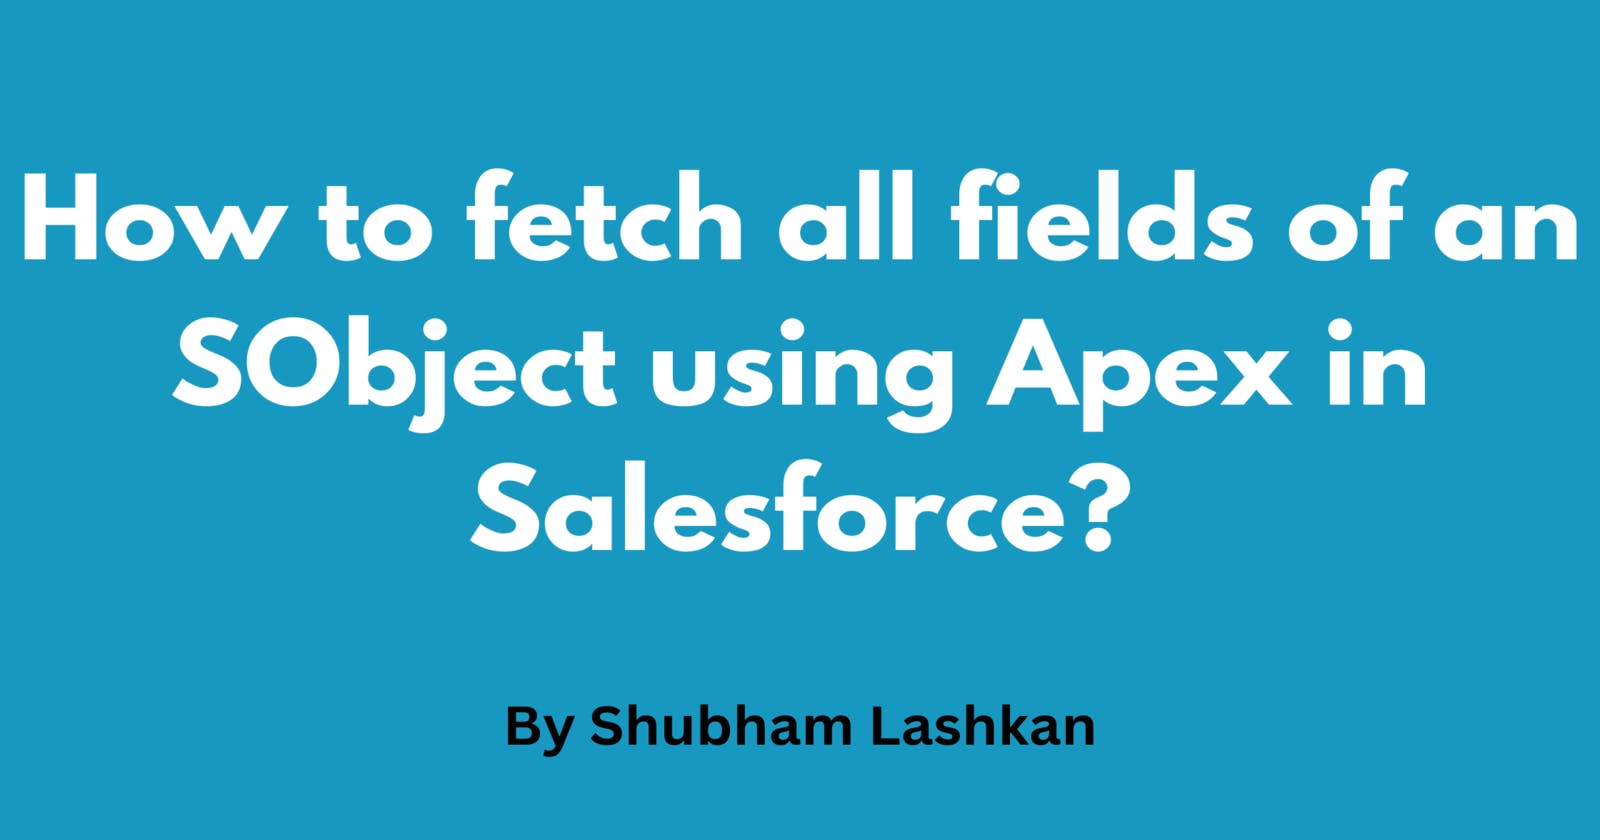 How to fetch all fields of an SObject using Apex in Salesforce?